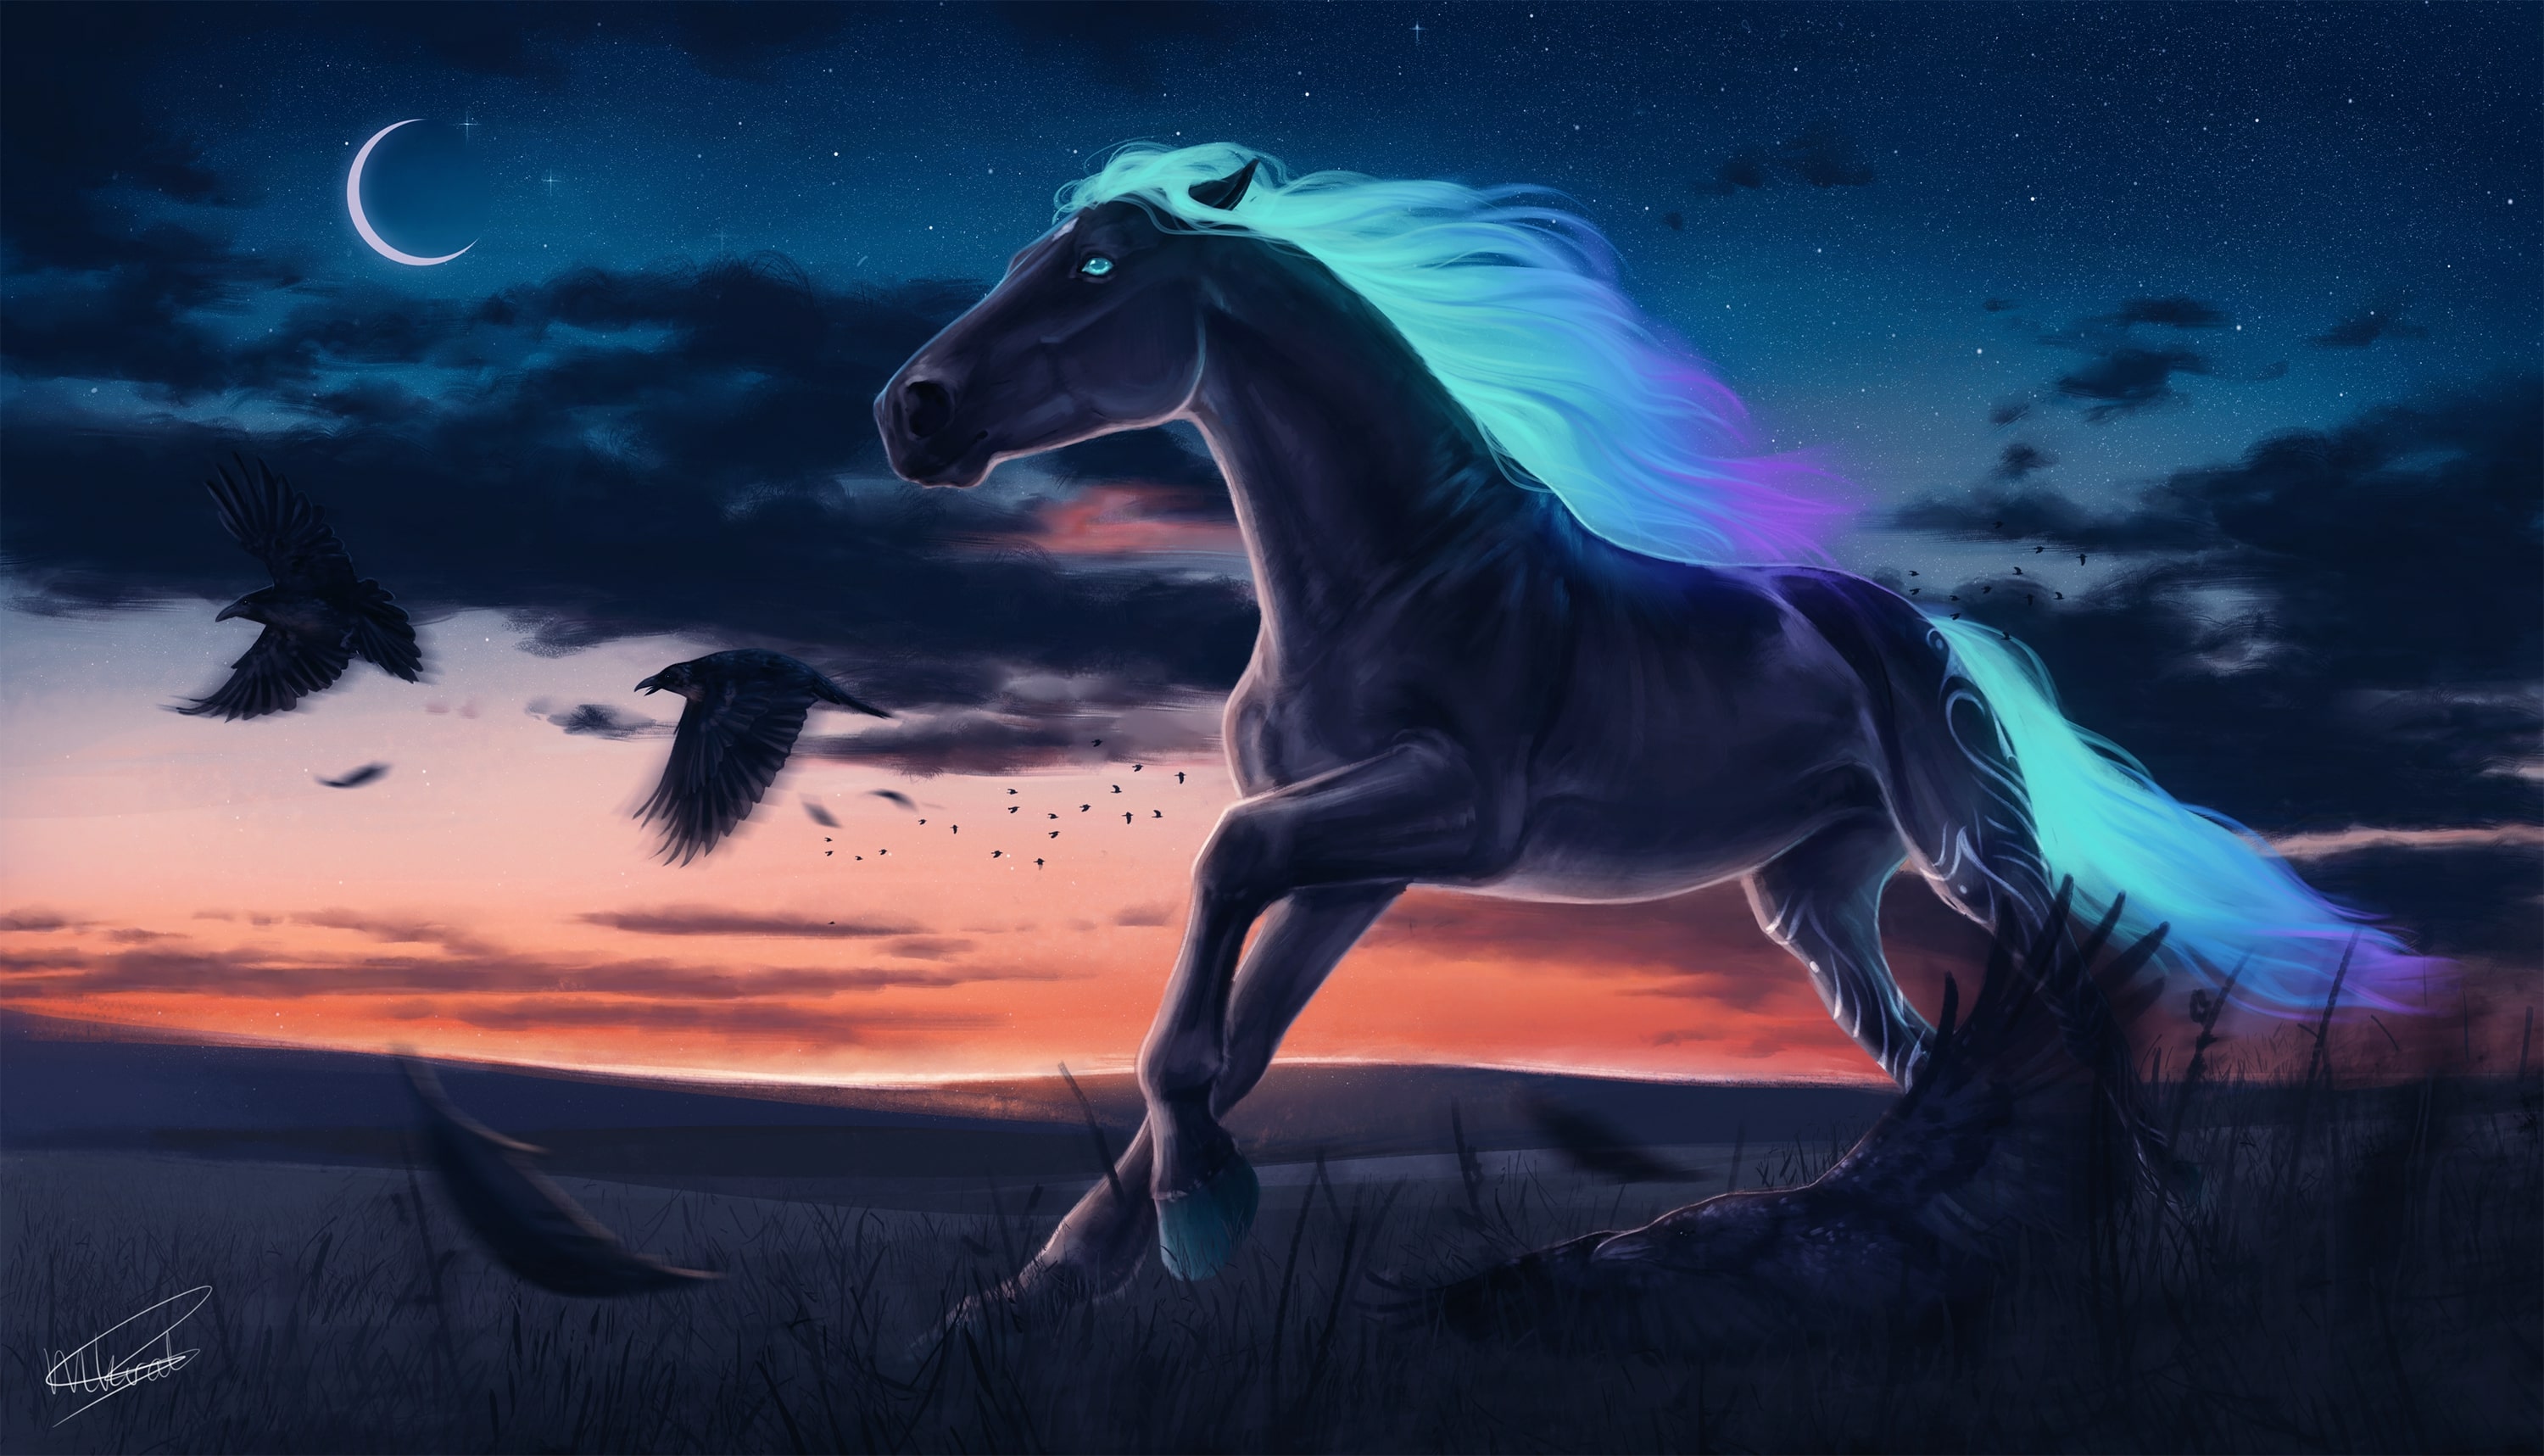 Unicorn Horse A Beautiful Blue Girl In Red Lake Swans Hd Wallpaper   Wallpapers13com